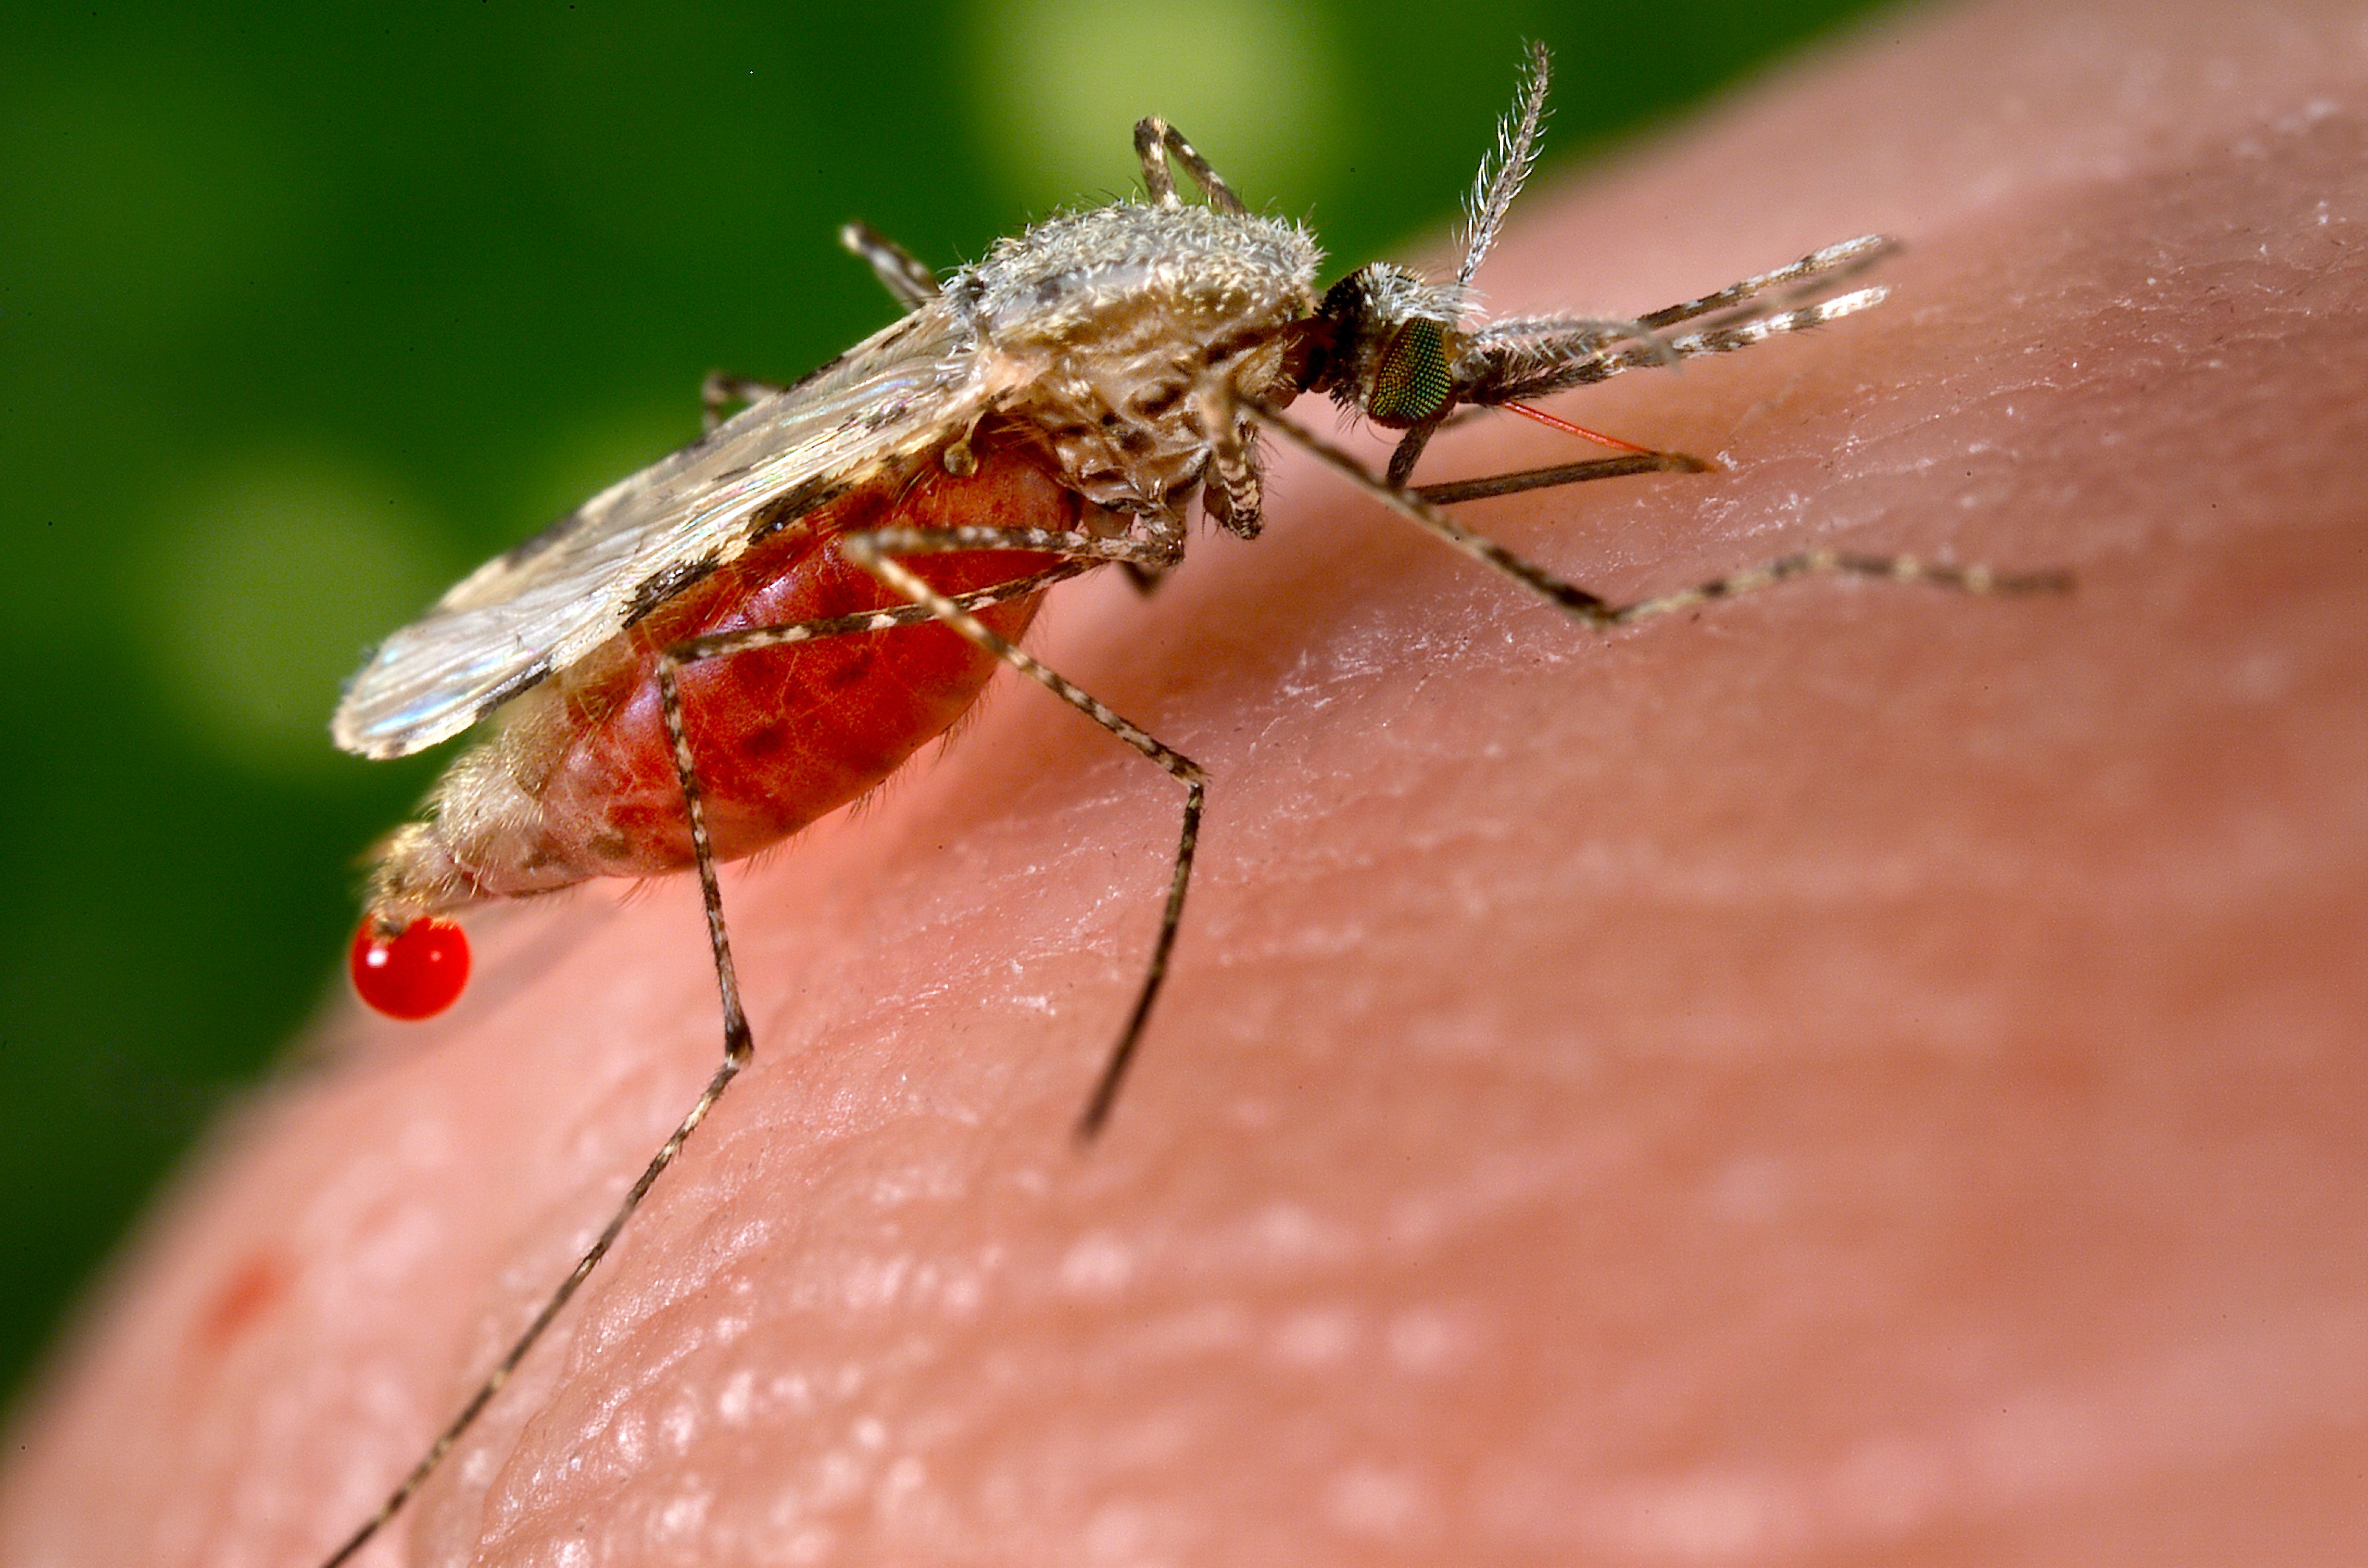 mosquito on skin with blood drop behind